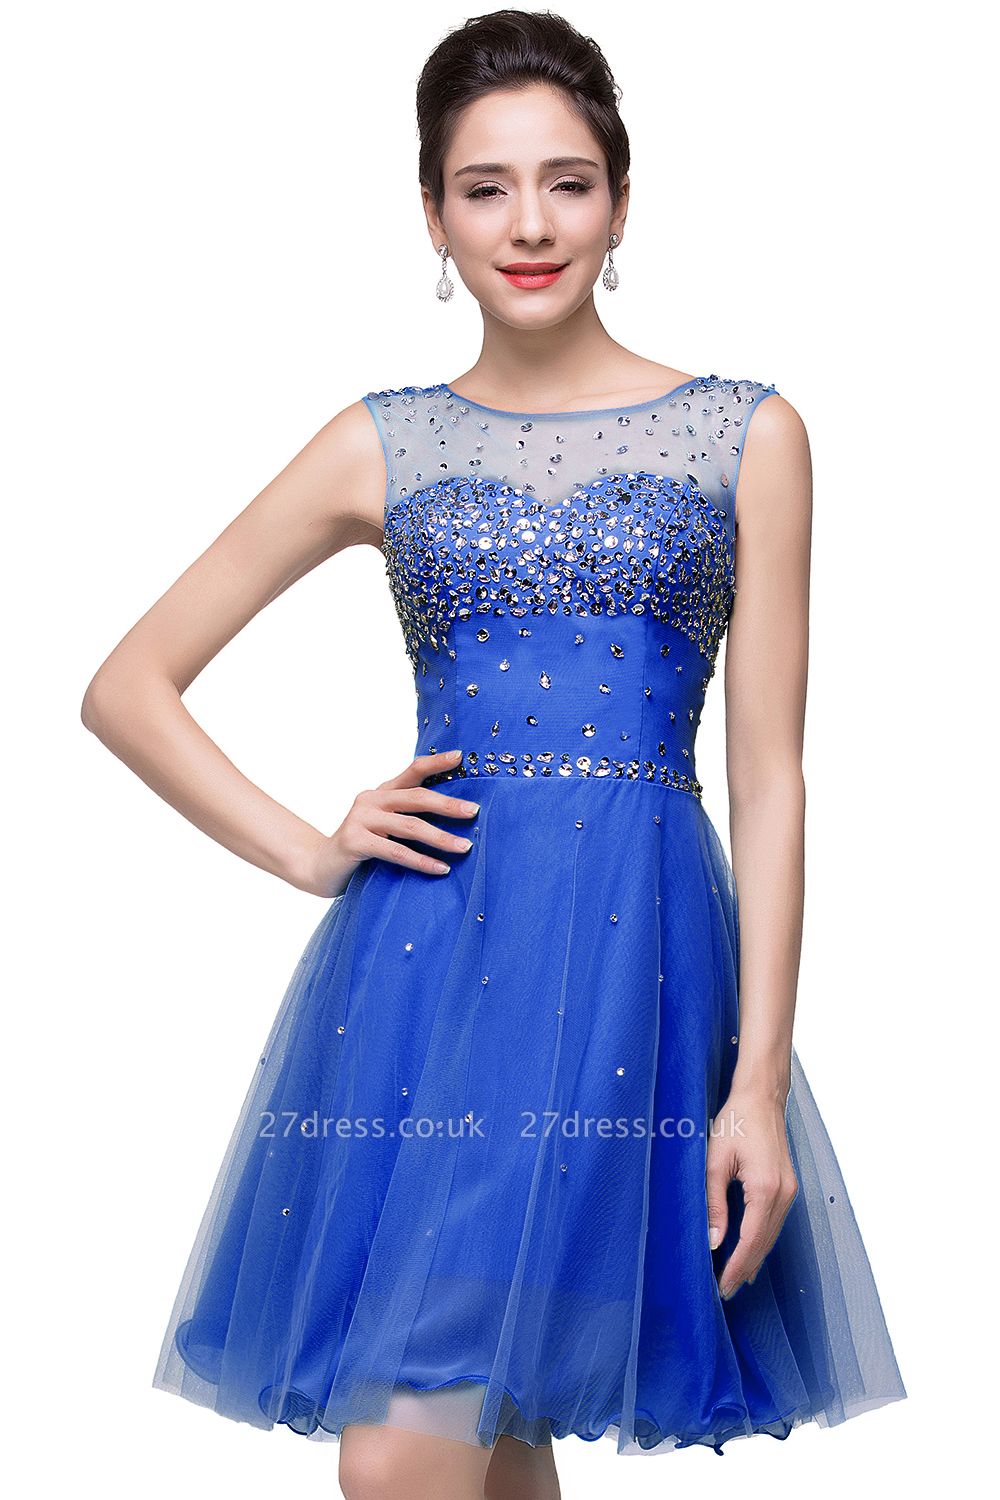 Luxurious Illusion Cap Sleeve Cocktail Dress UK Beadings Crystals Tulle Short Homecoming Gown CPS170